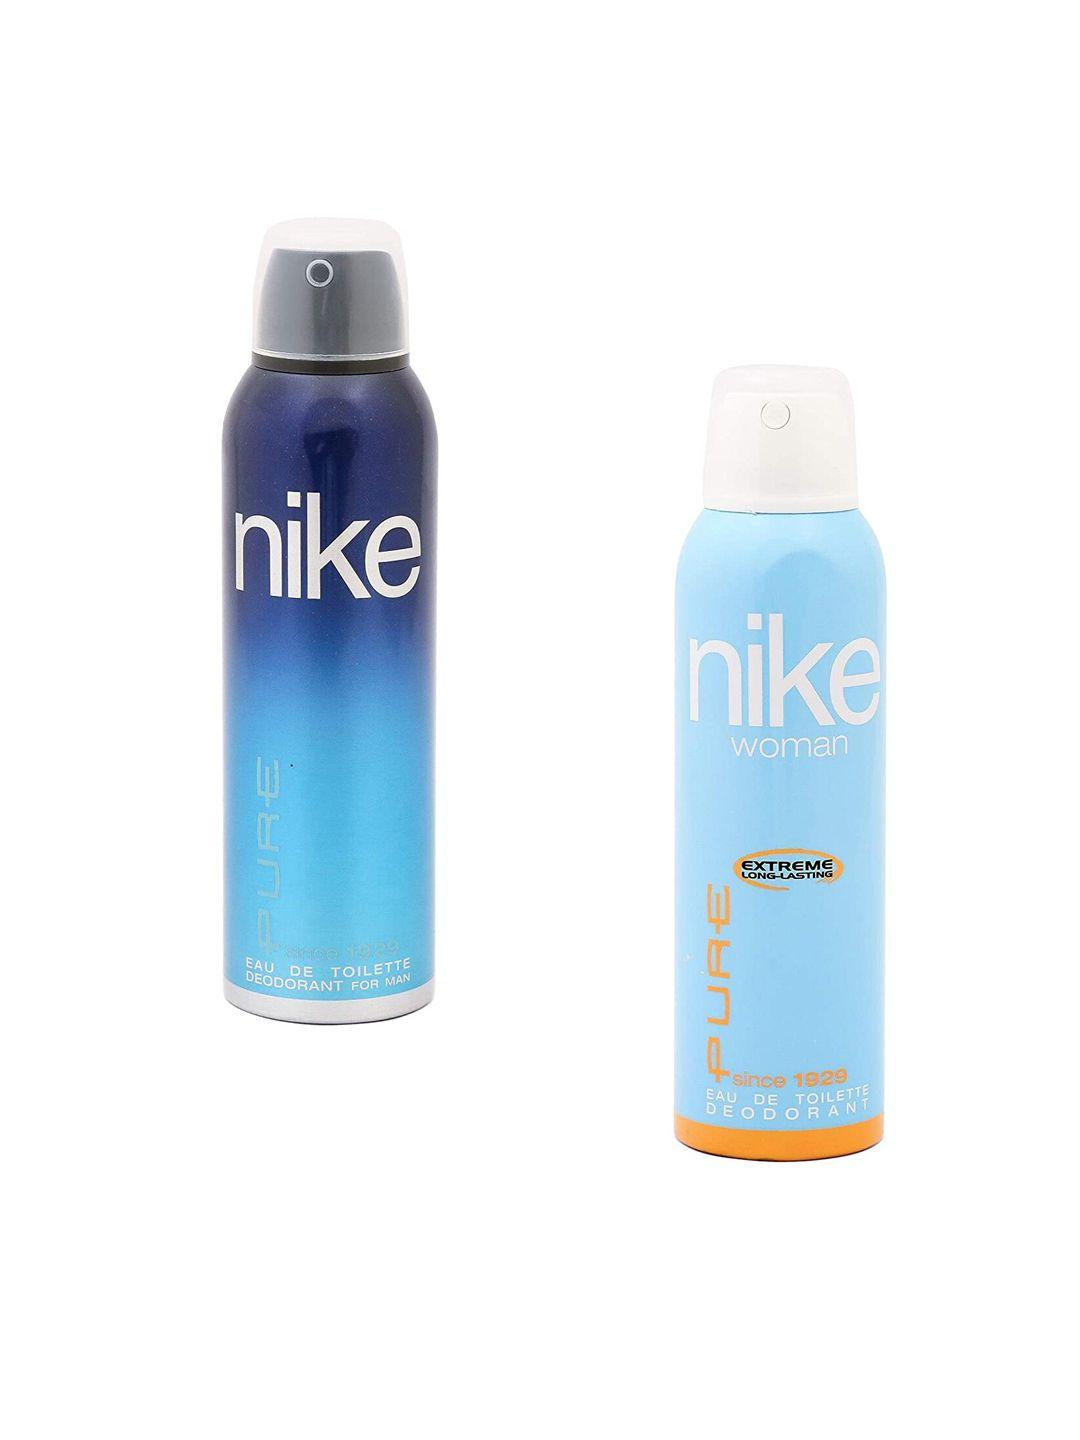 nike set of 2 extreme long lasting pure edt deodorants - 200ml each